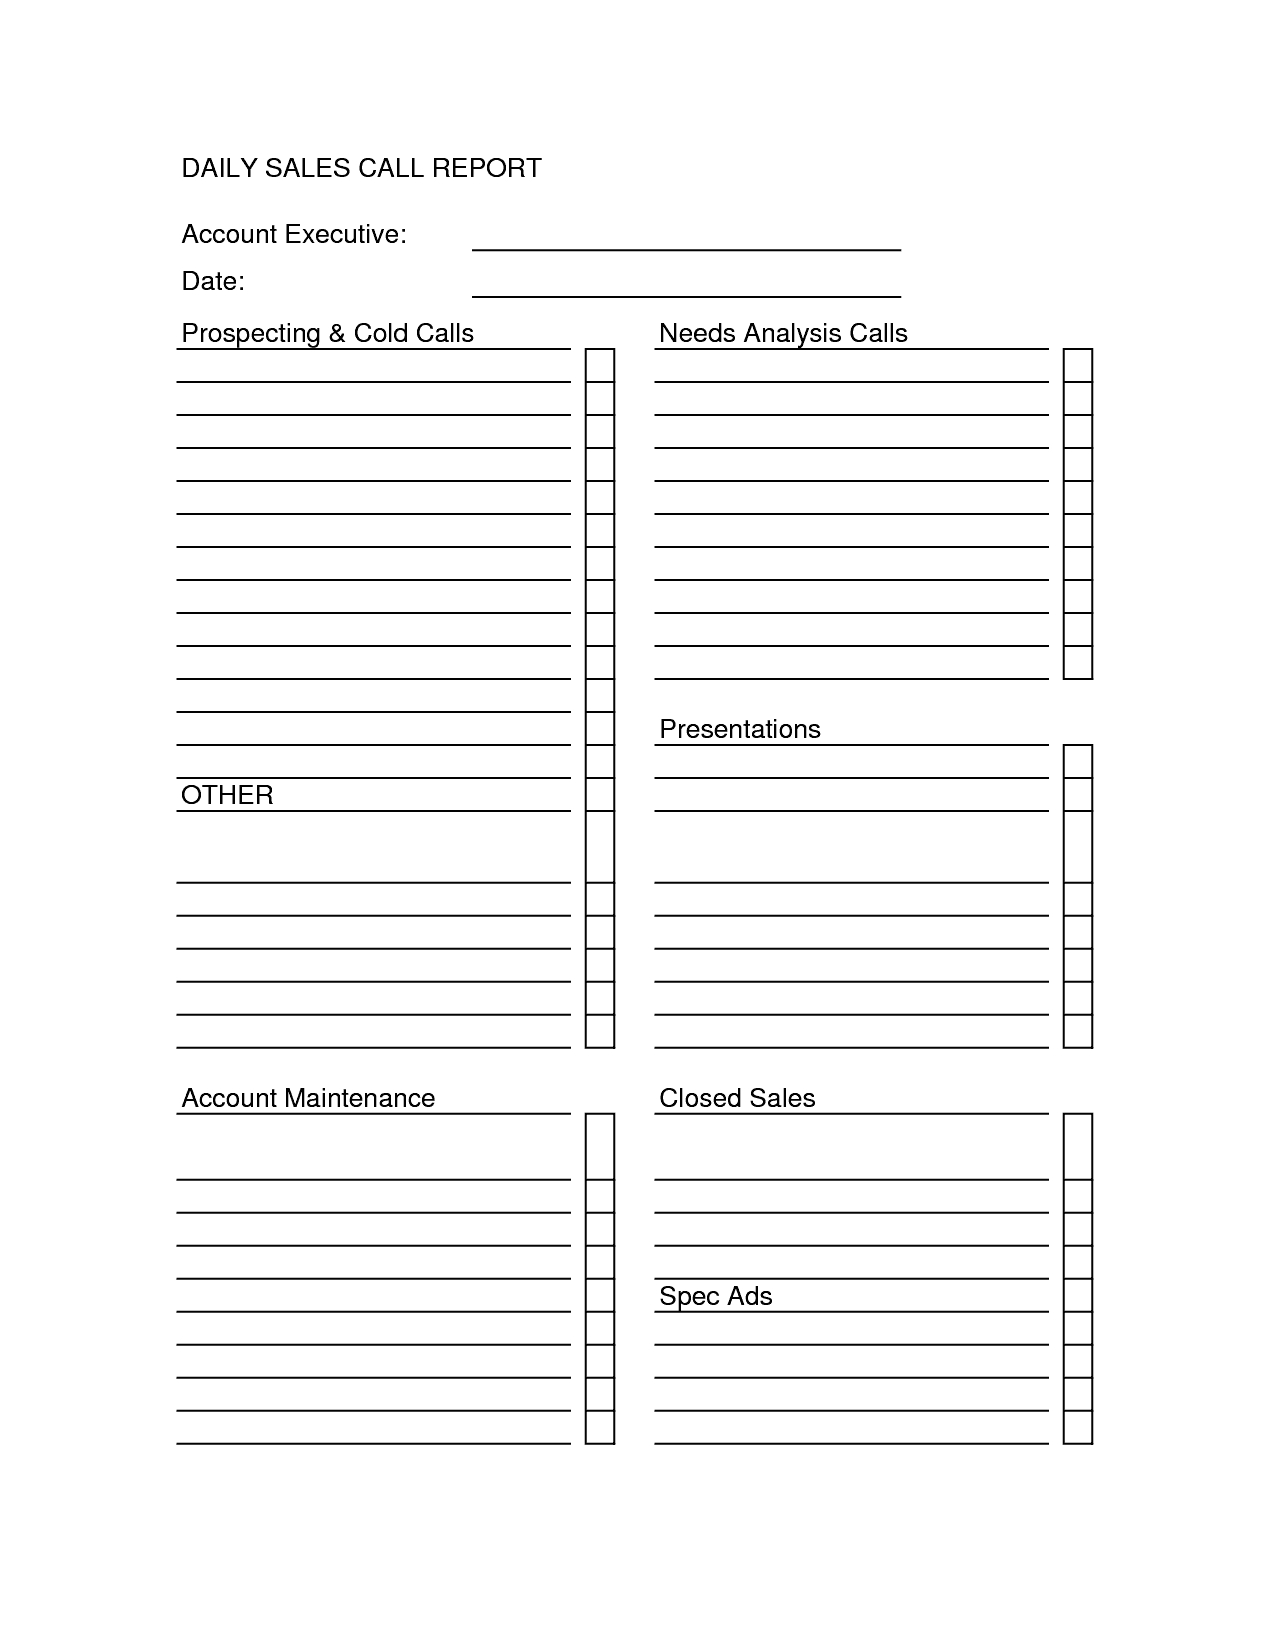 Sales Call Report Templates - Word Excel Fomats In Sales Call Report Template Free